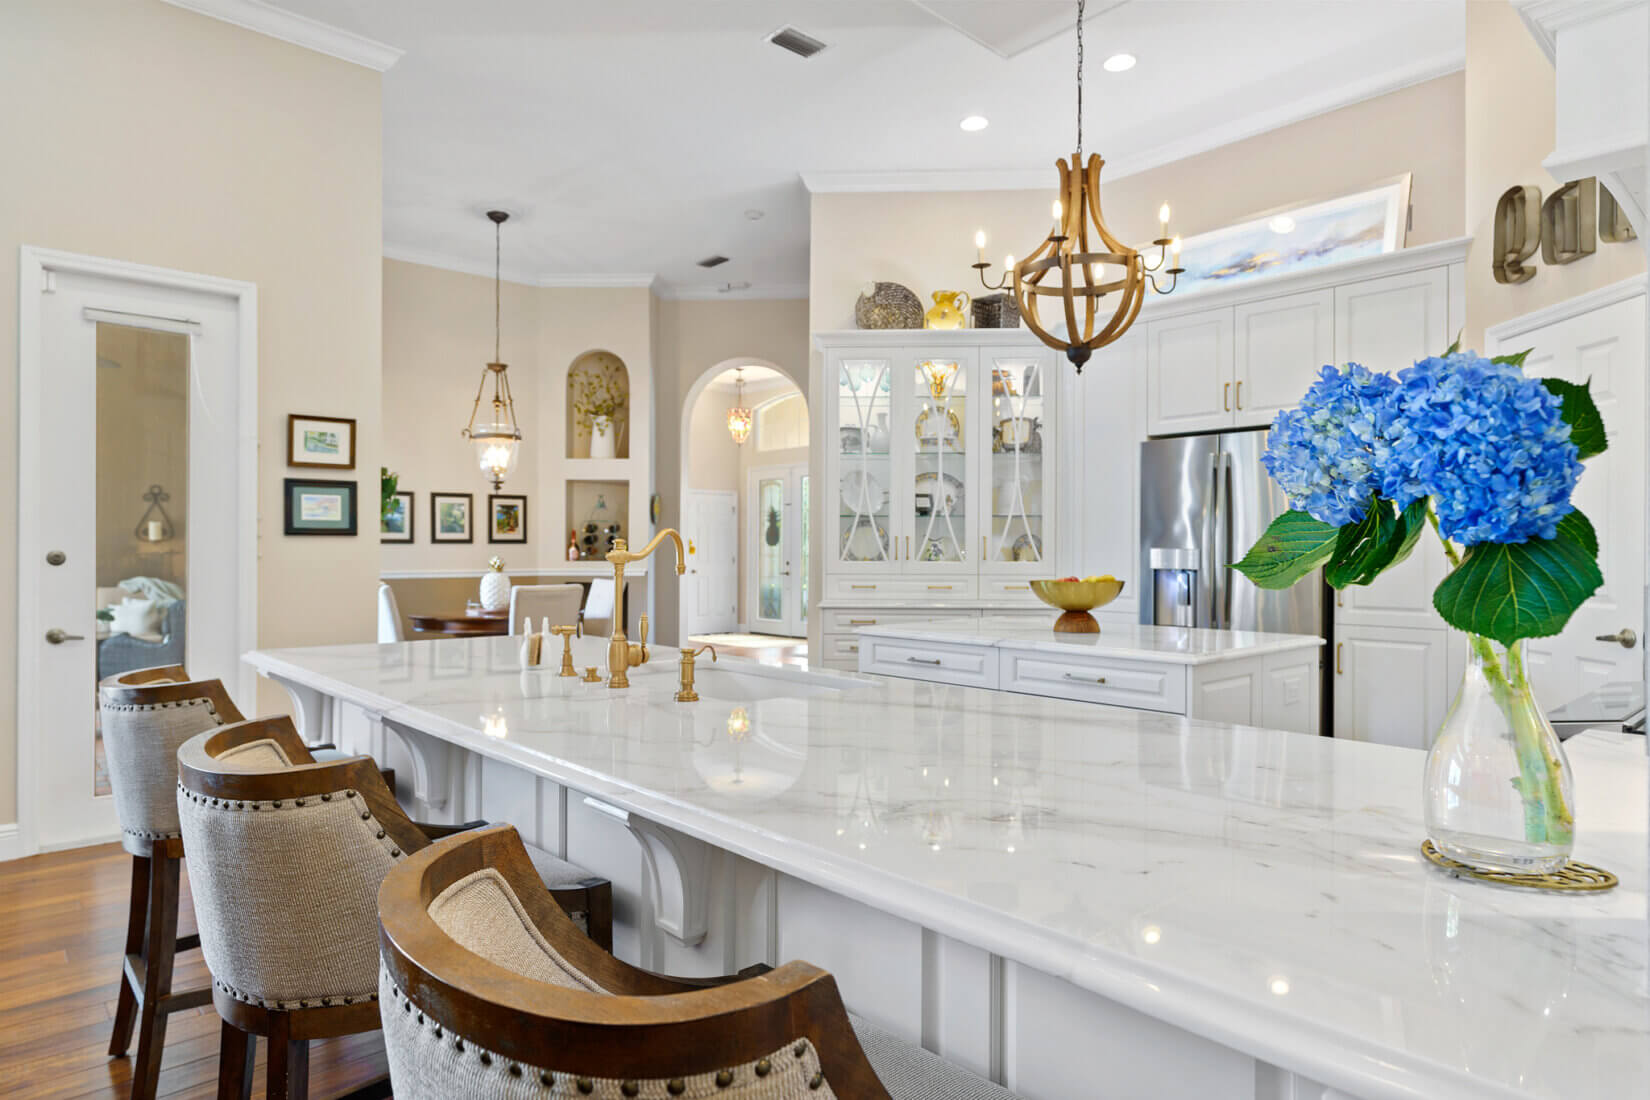 Luxury home kitchen design with white kitchen counter with brown bar stools